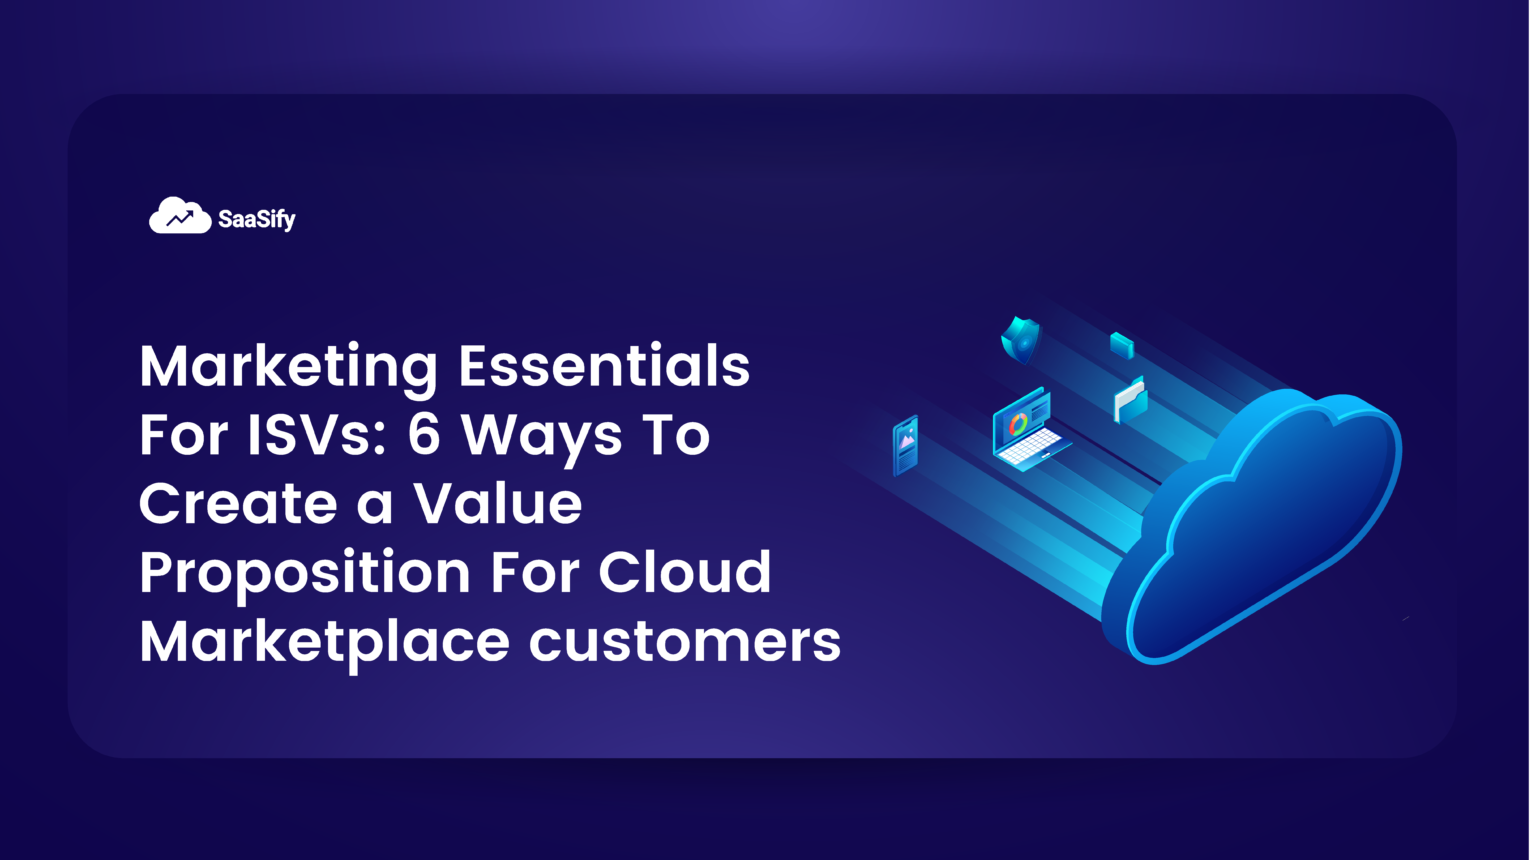 Marketing-Essentials-For-ISVs-6-Ways-To-Create-a-Value-Proposition-For-Cloud-Marketplace-customers-1536x860